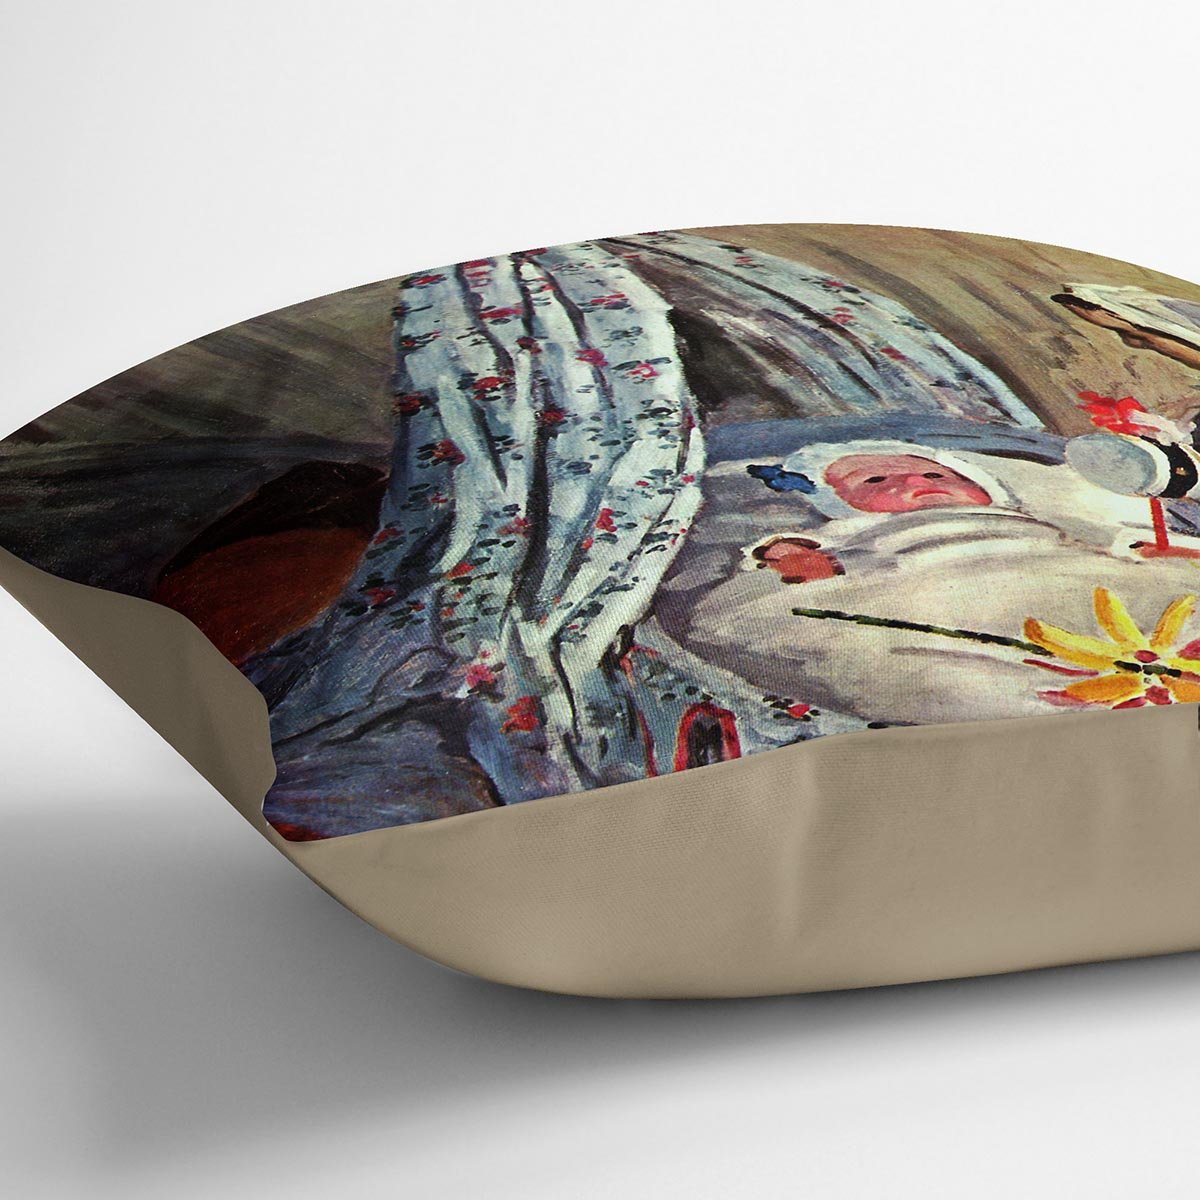 Jean Monet in the cradle by Monet Throw Pillow